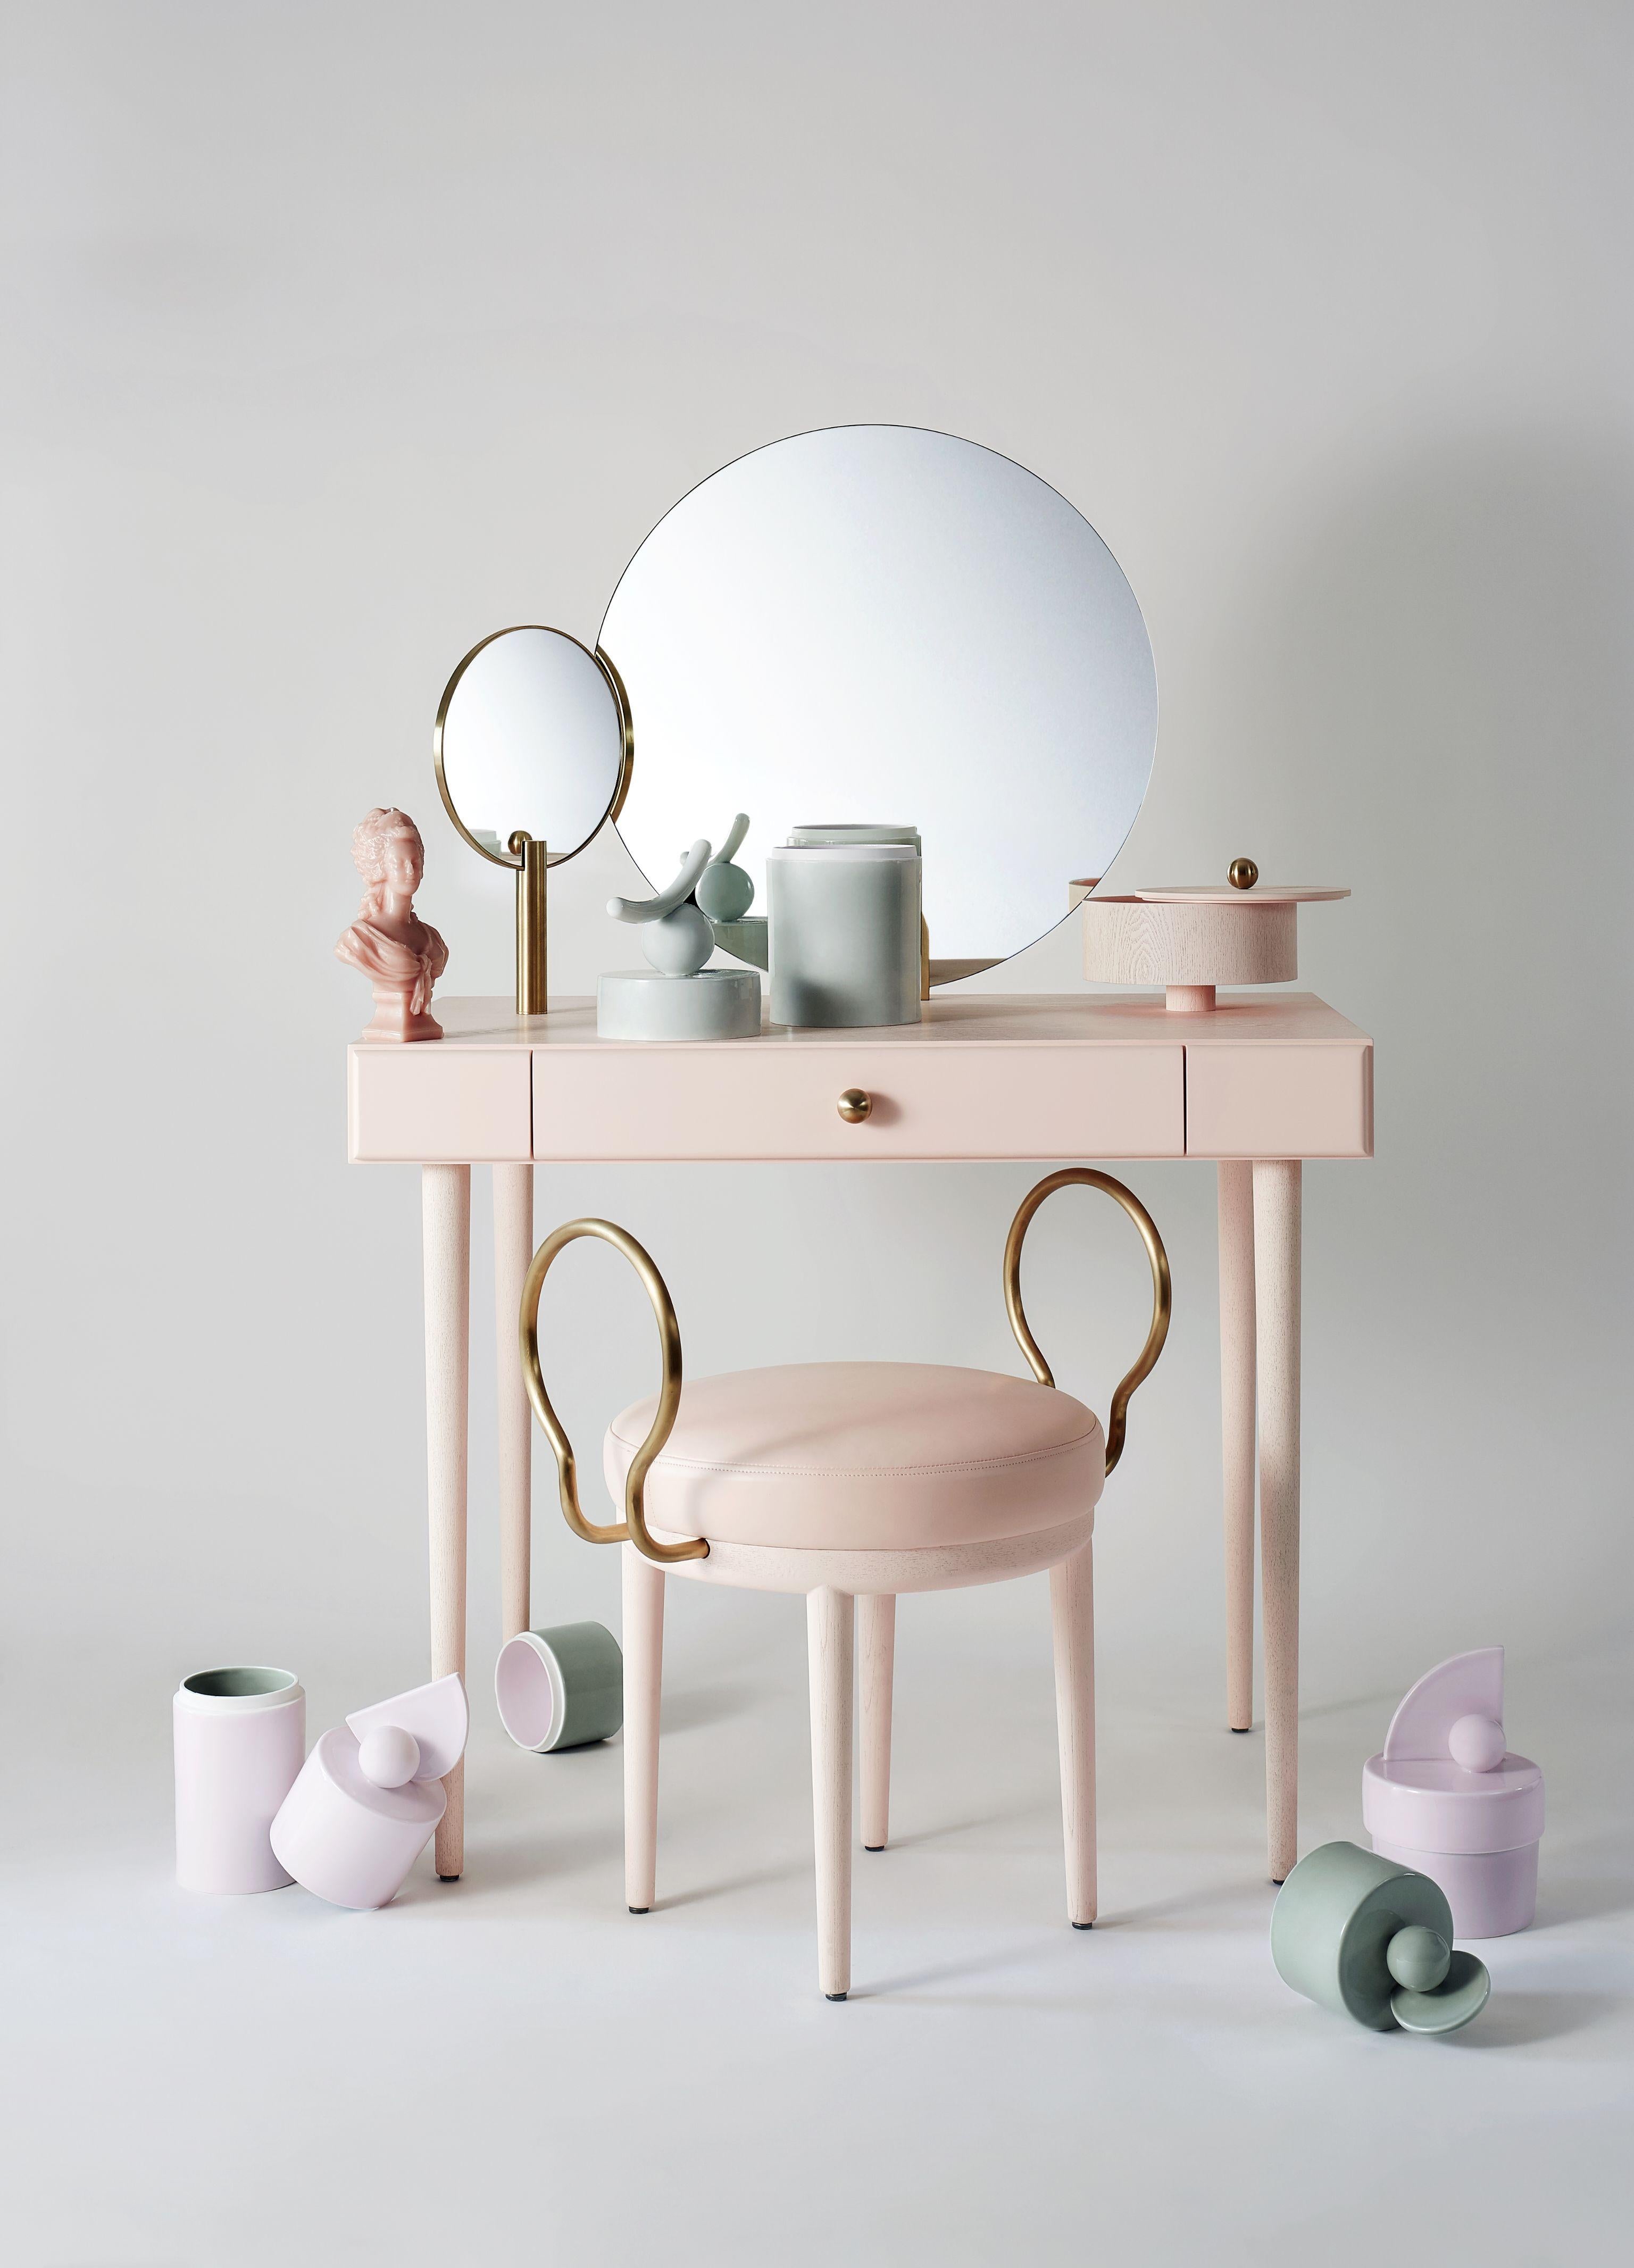 Rose selavy vanity desk with stool by Thomas Dariel, Maison Dada
Vanity desk • W94 x D59 x H139.5 cm
Stool • W57 x D43 x H64 cm
Desktop in painted ash veneer • fronts in matte paint finish
Structure in MDF • Metal legs with painted ash